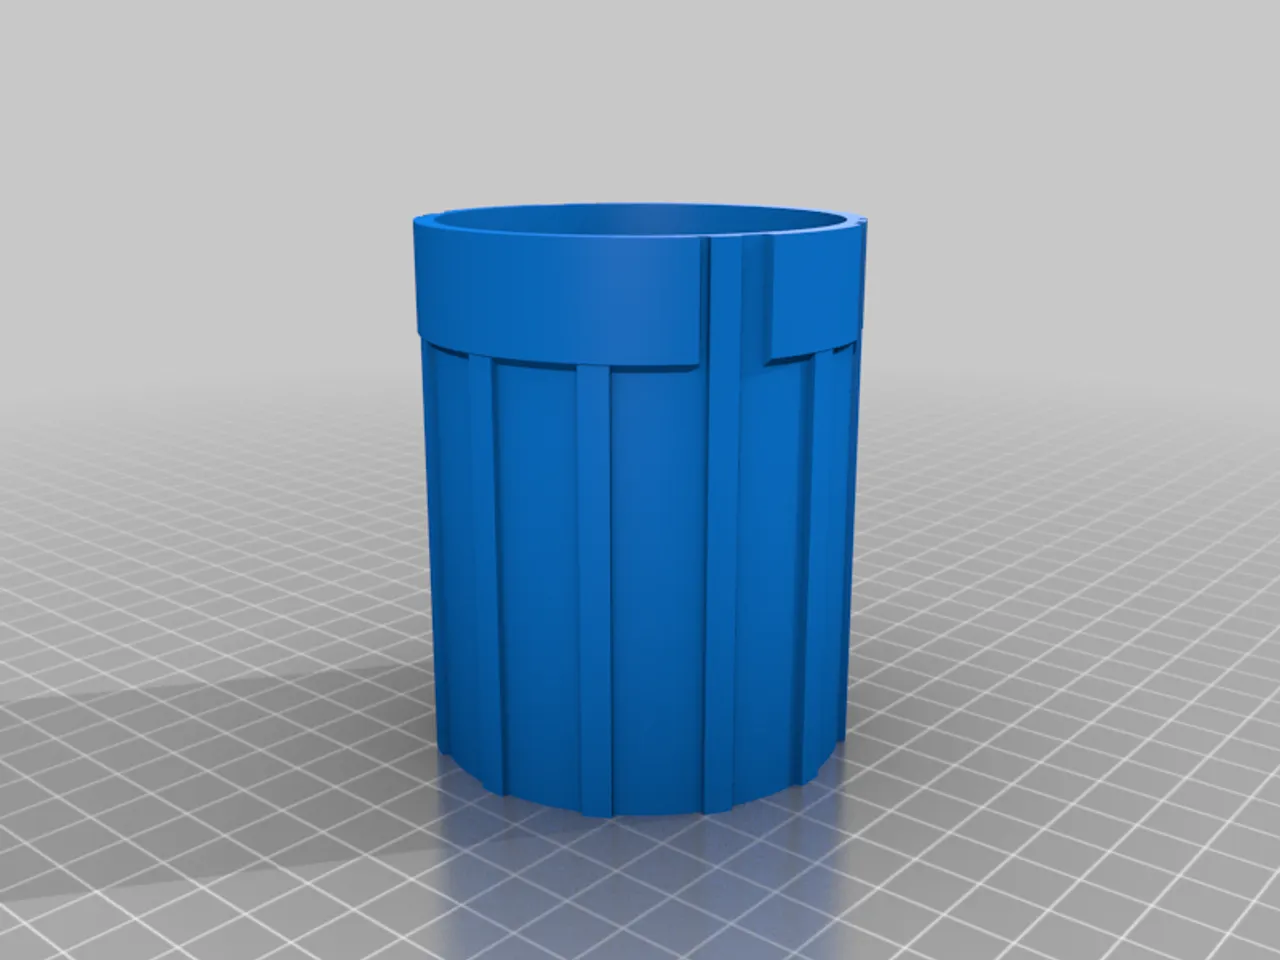 Small Trash Can (Lego look like) by GedeonLab, Download free STL model